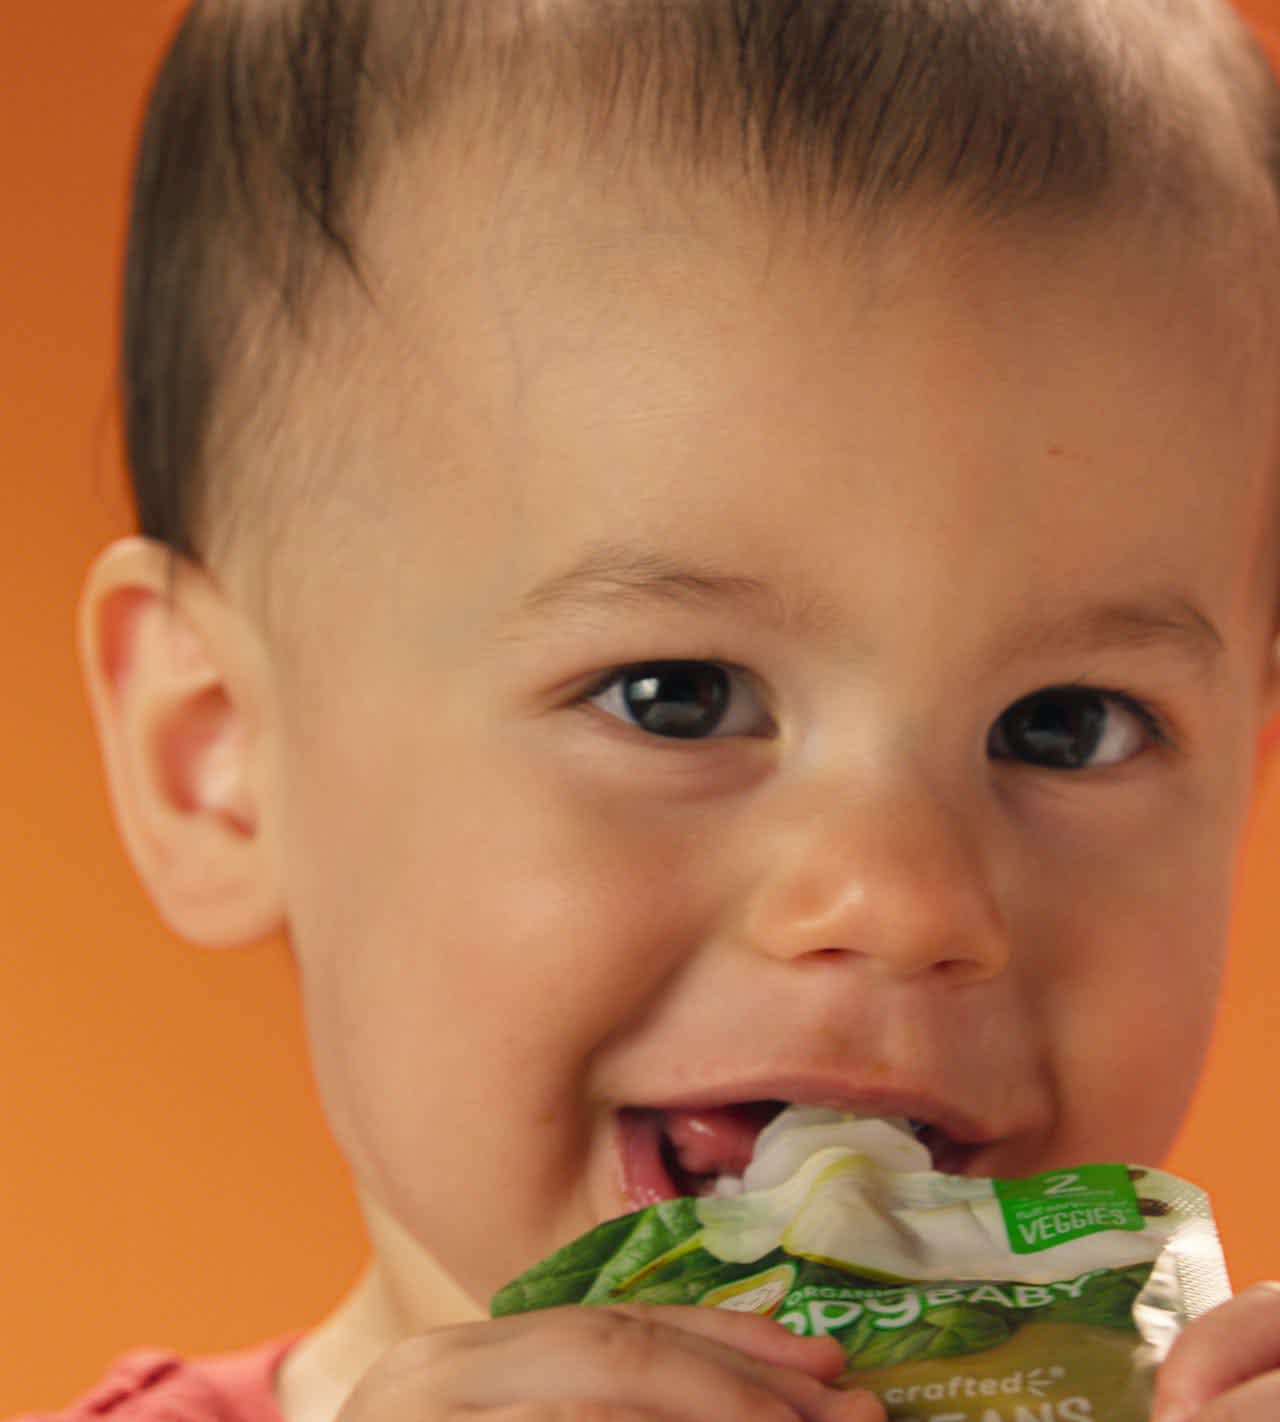 Nutritious Organic Baby Food & More